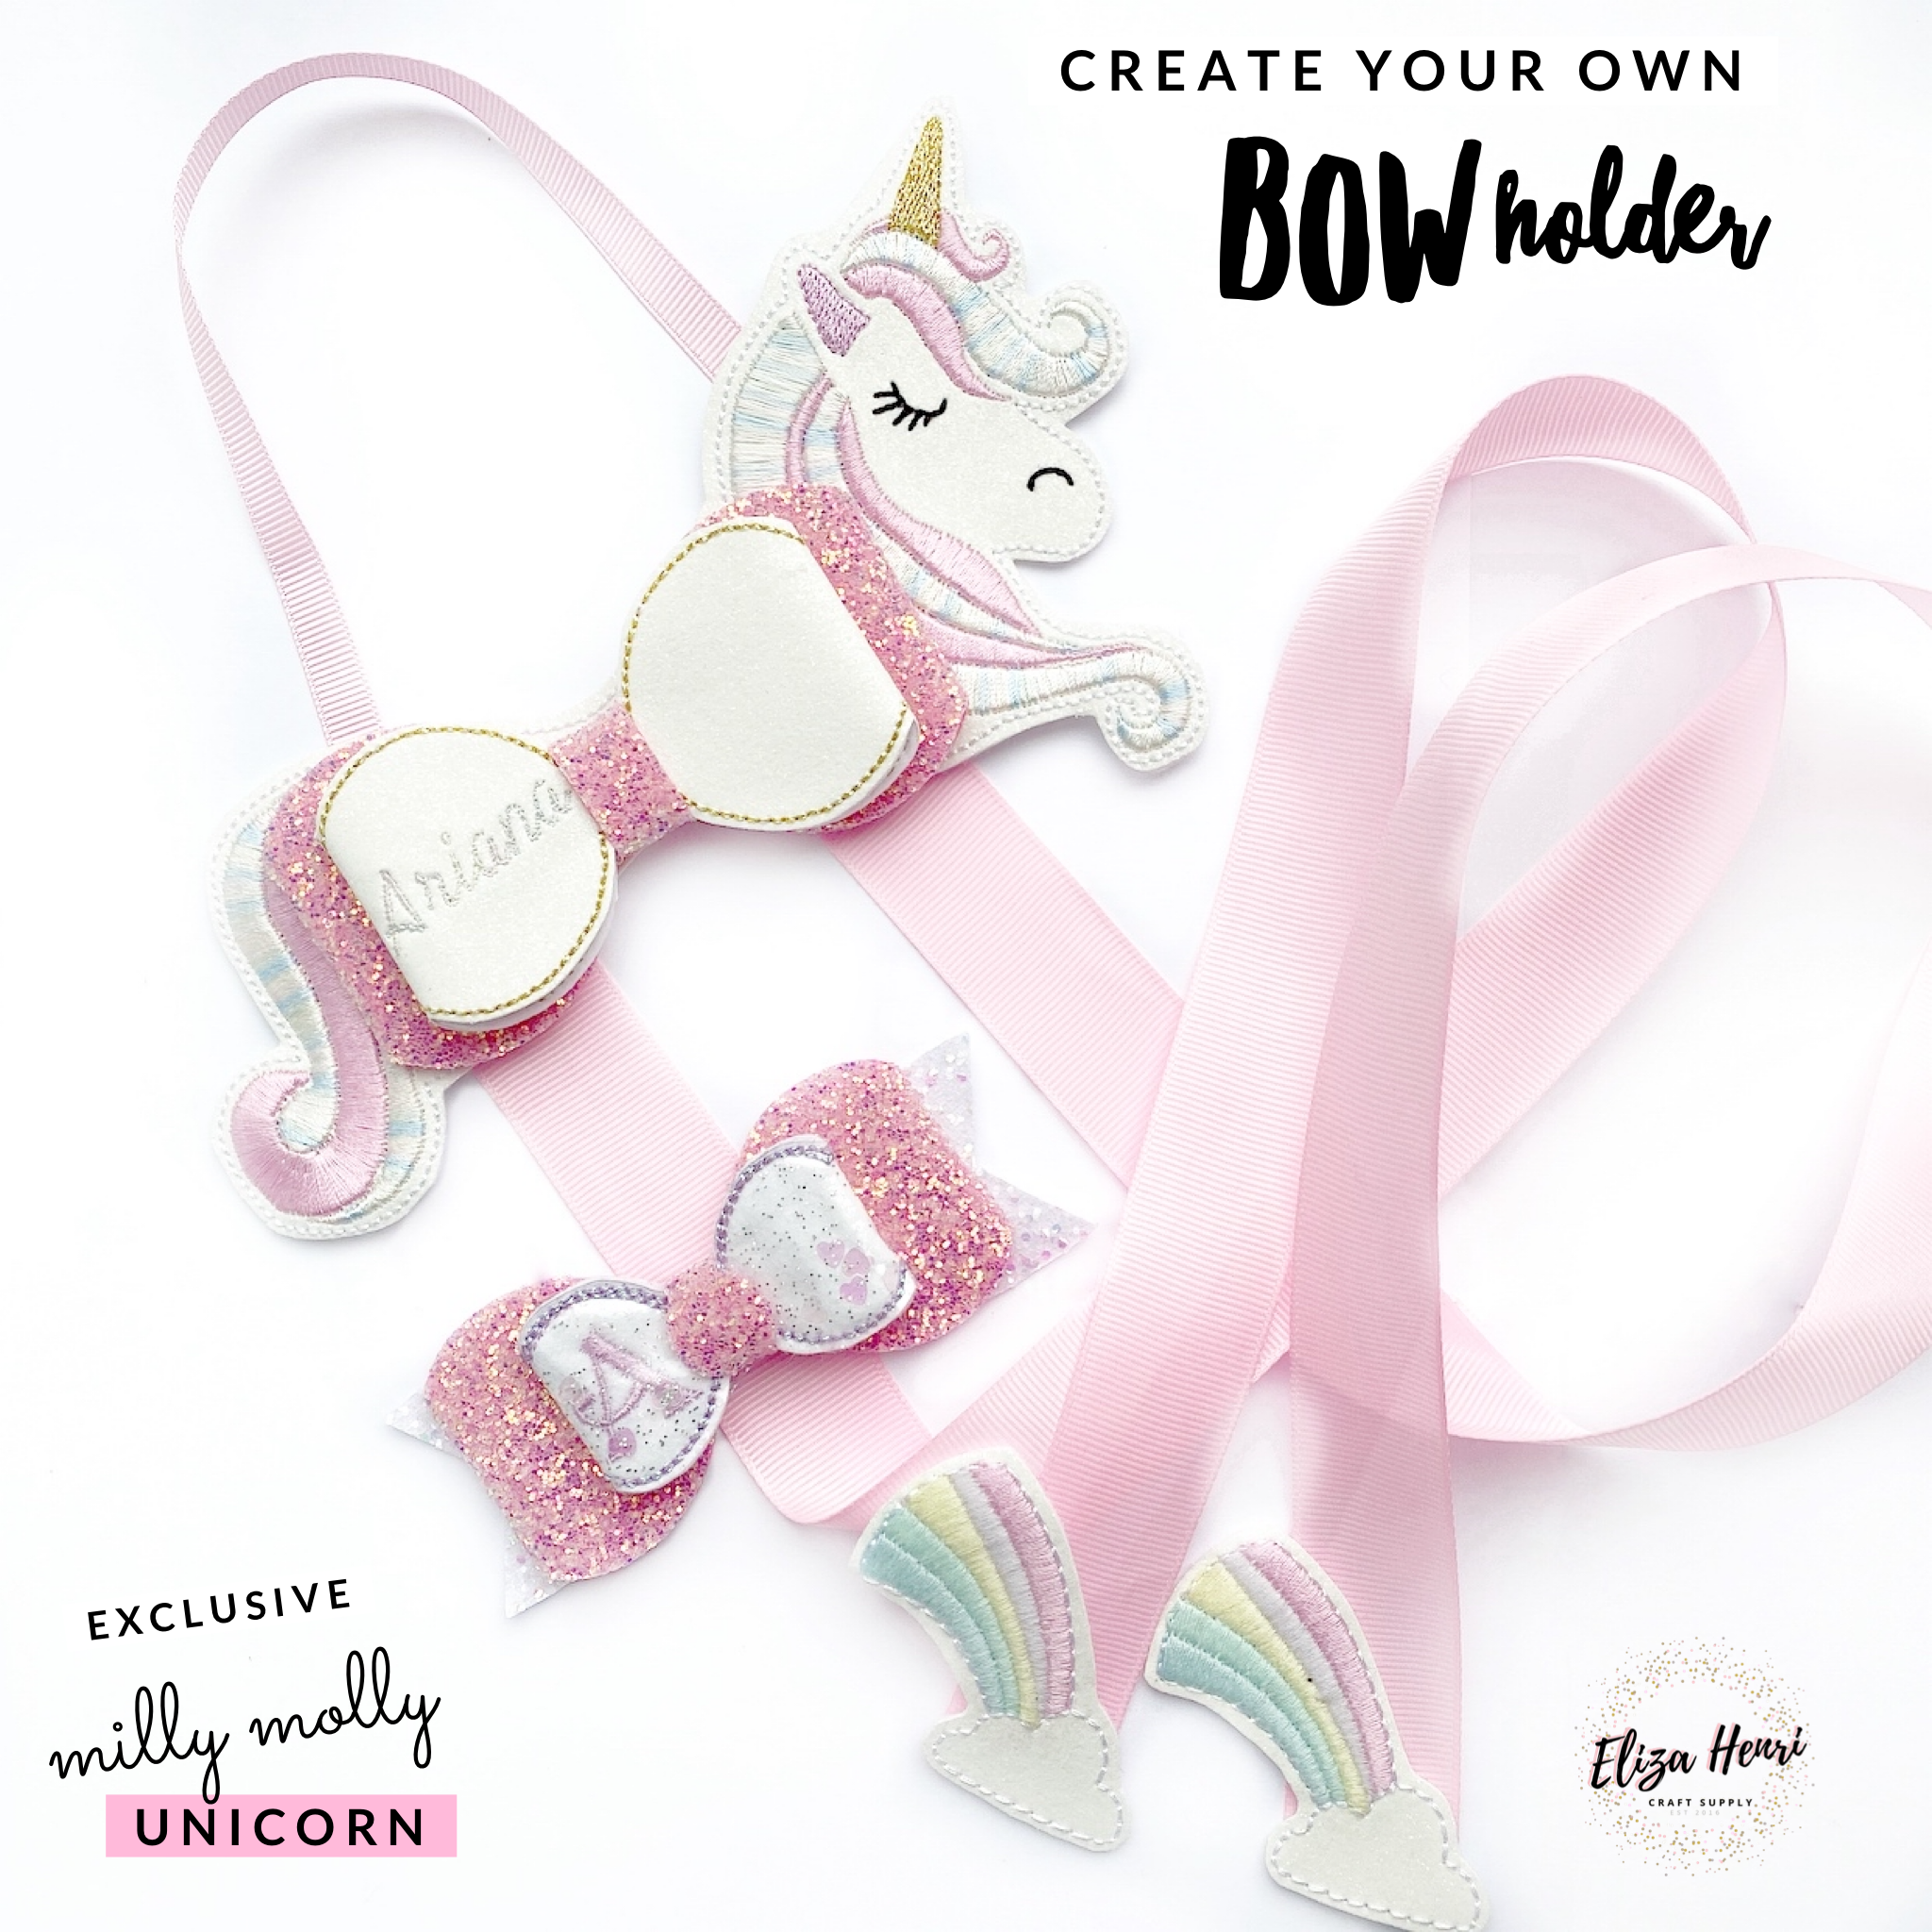 New Head & Tails Bow Holders- Milly Molly Unicorn